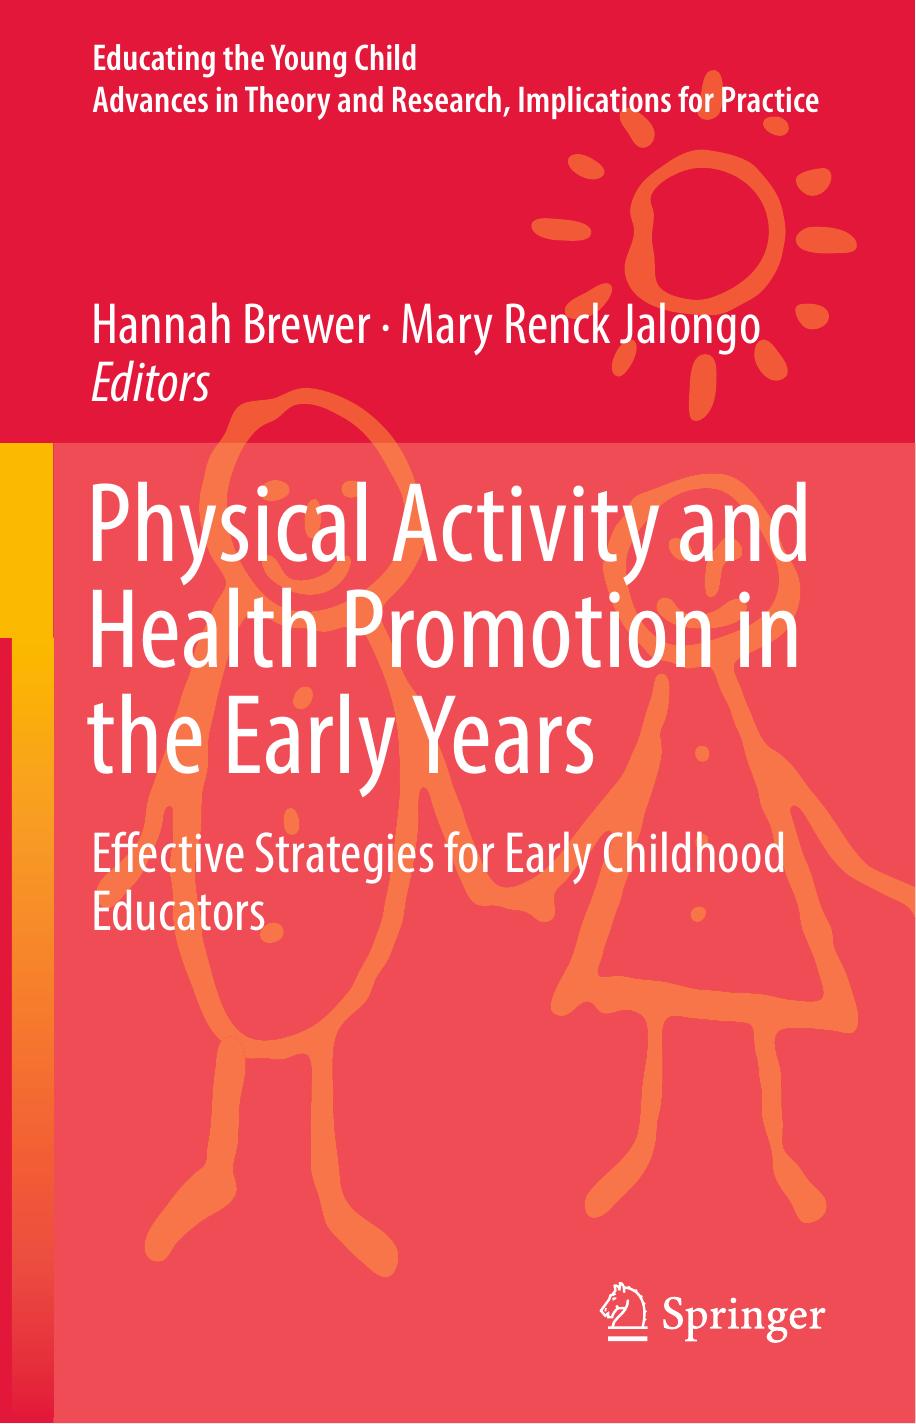 Physical Activity and Health Promotion in the Early Years Effective Strategies for Early Childhood Educators 2018